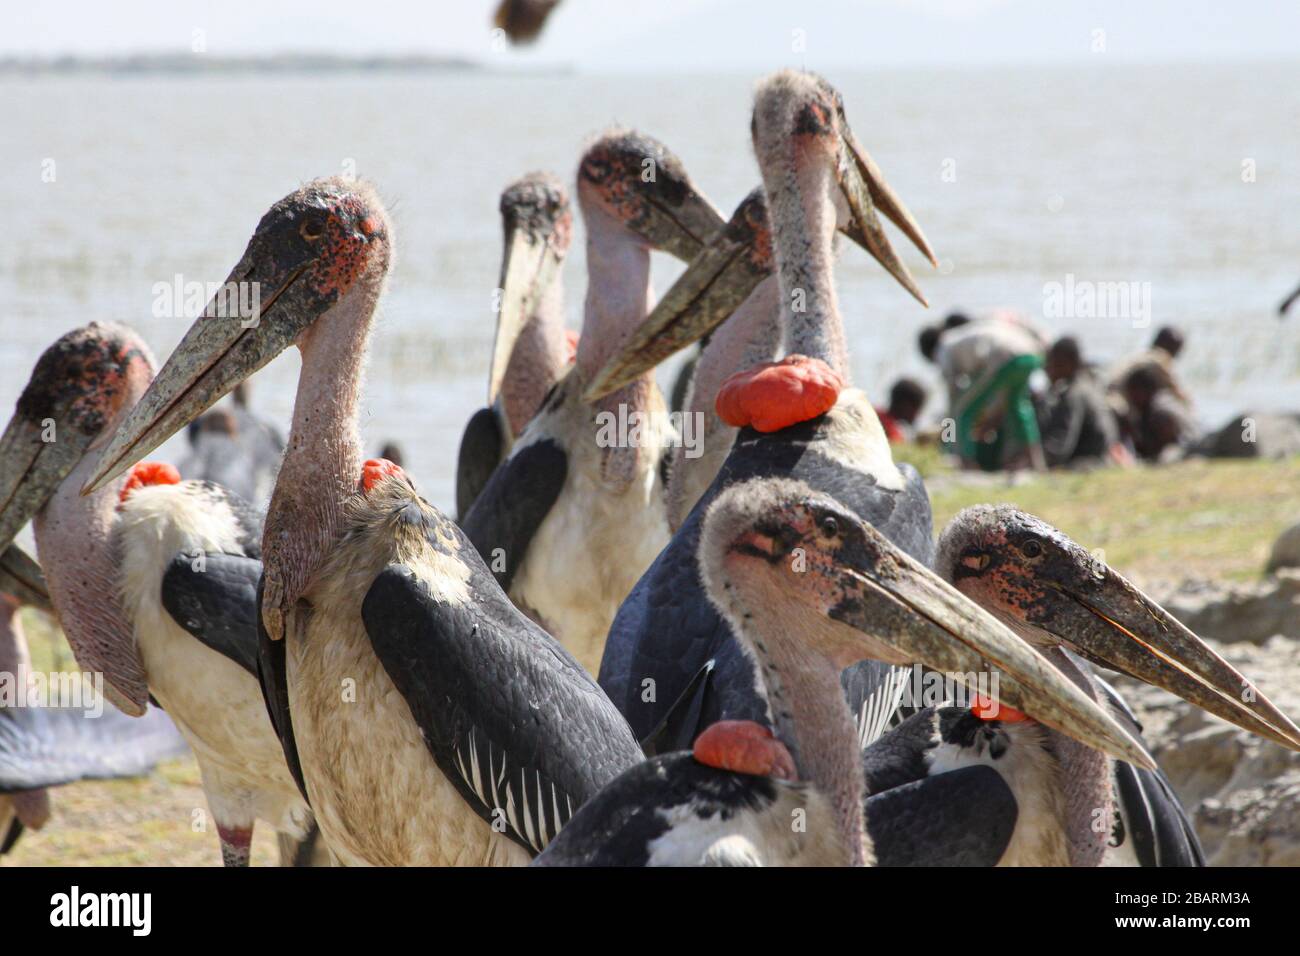 Marabou Storks, (Leptoptilos crumeniferus), wade in the water. This large stork is found it sub-Saharan Africa. It specialises in scavenging, competin Stock Photo